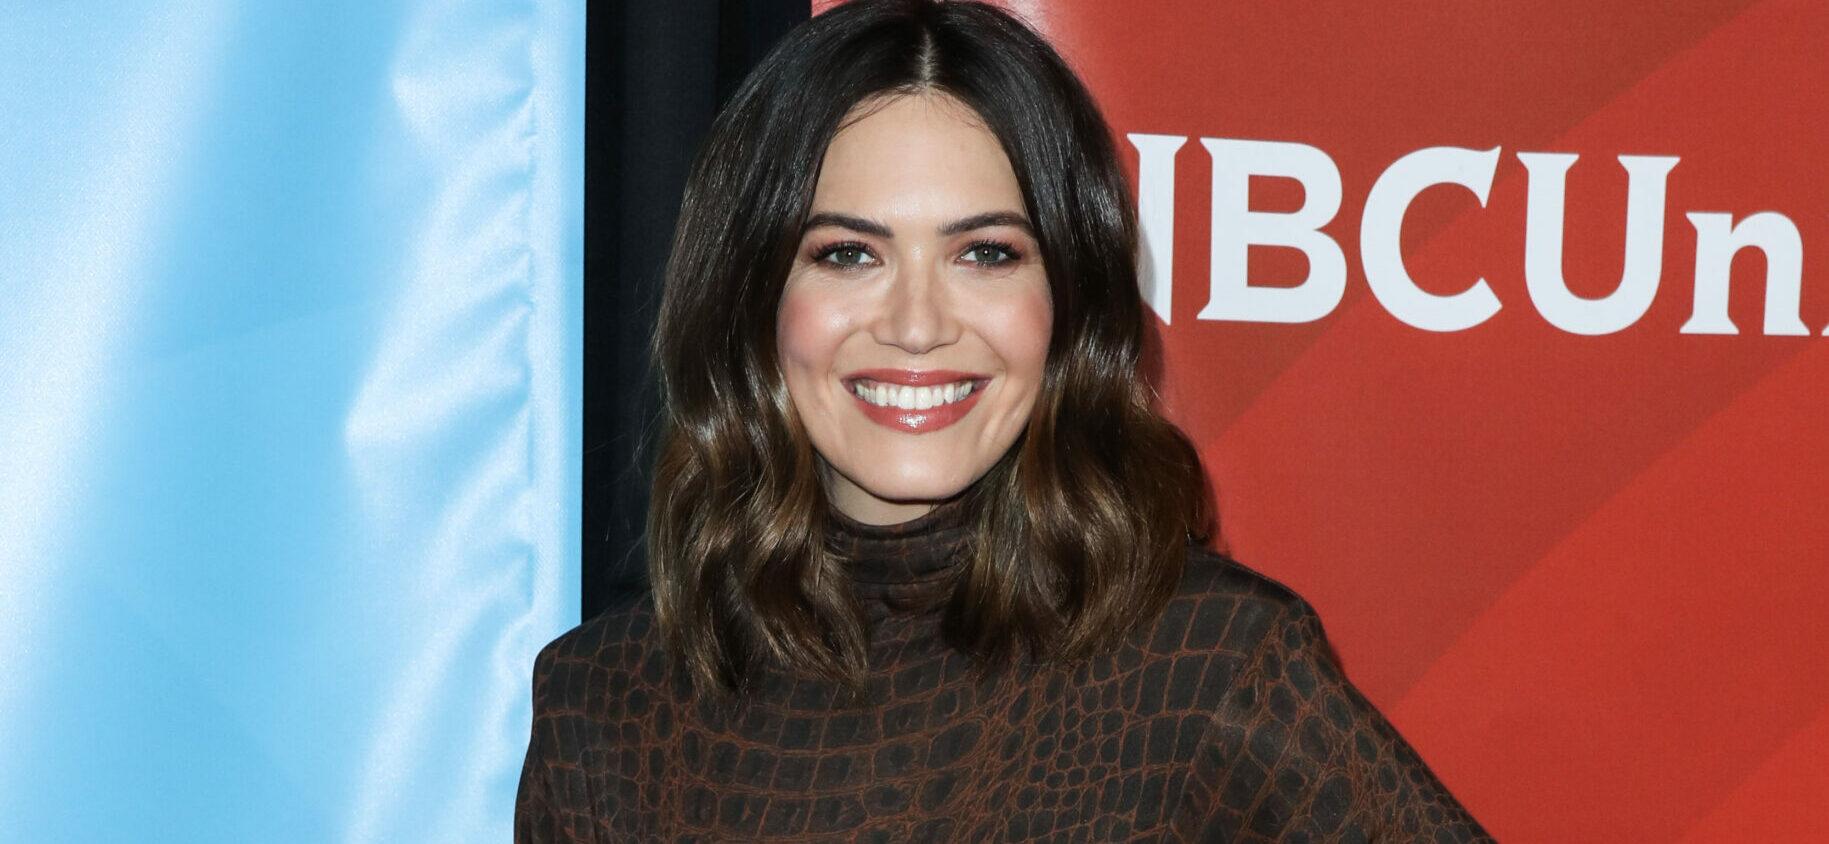 'This Is Us' Star Mandy Moore Questions If COVID Is Contracted Through Hotel Air Vents